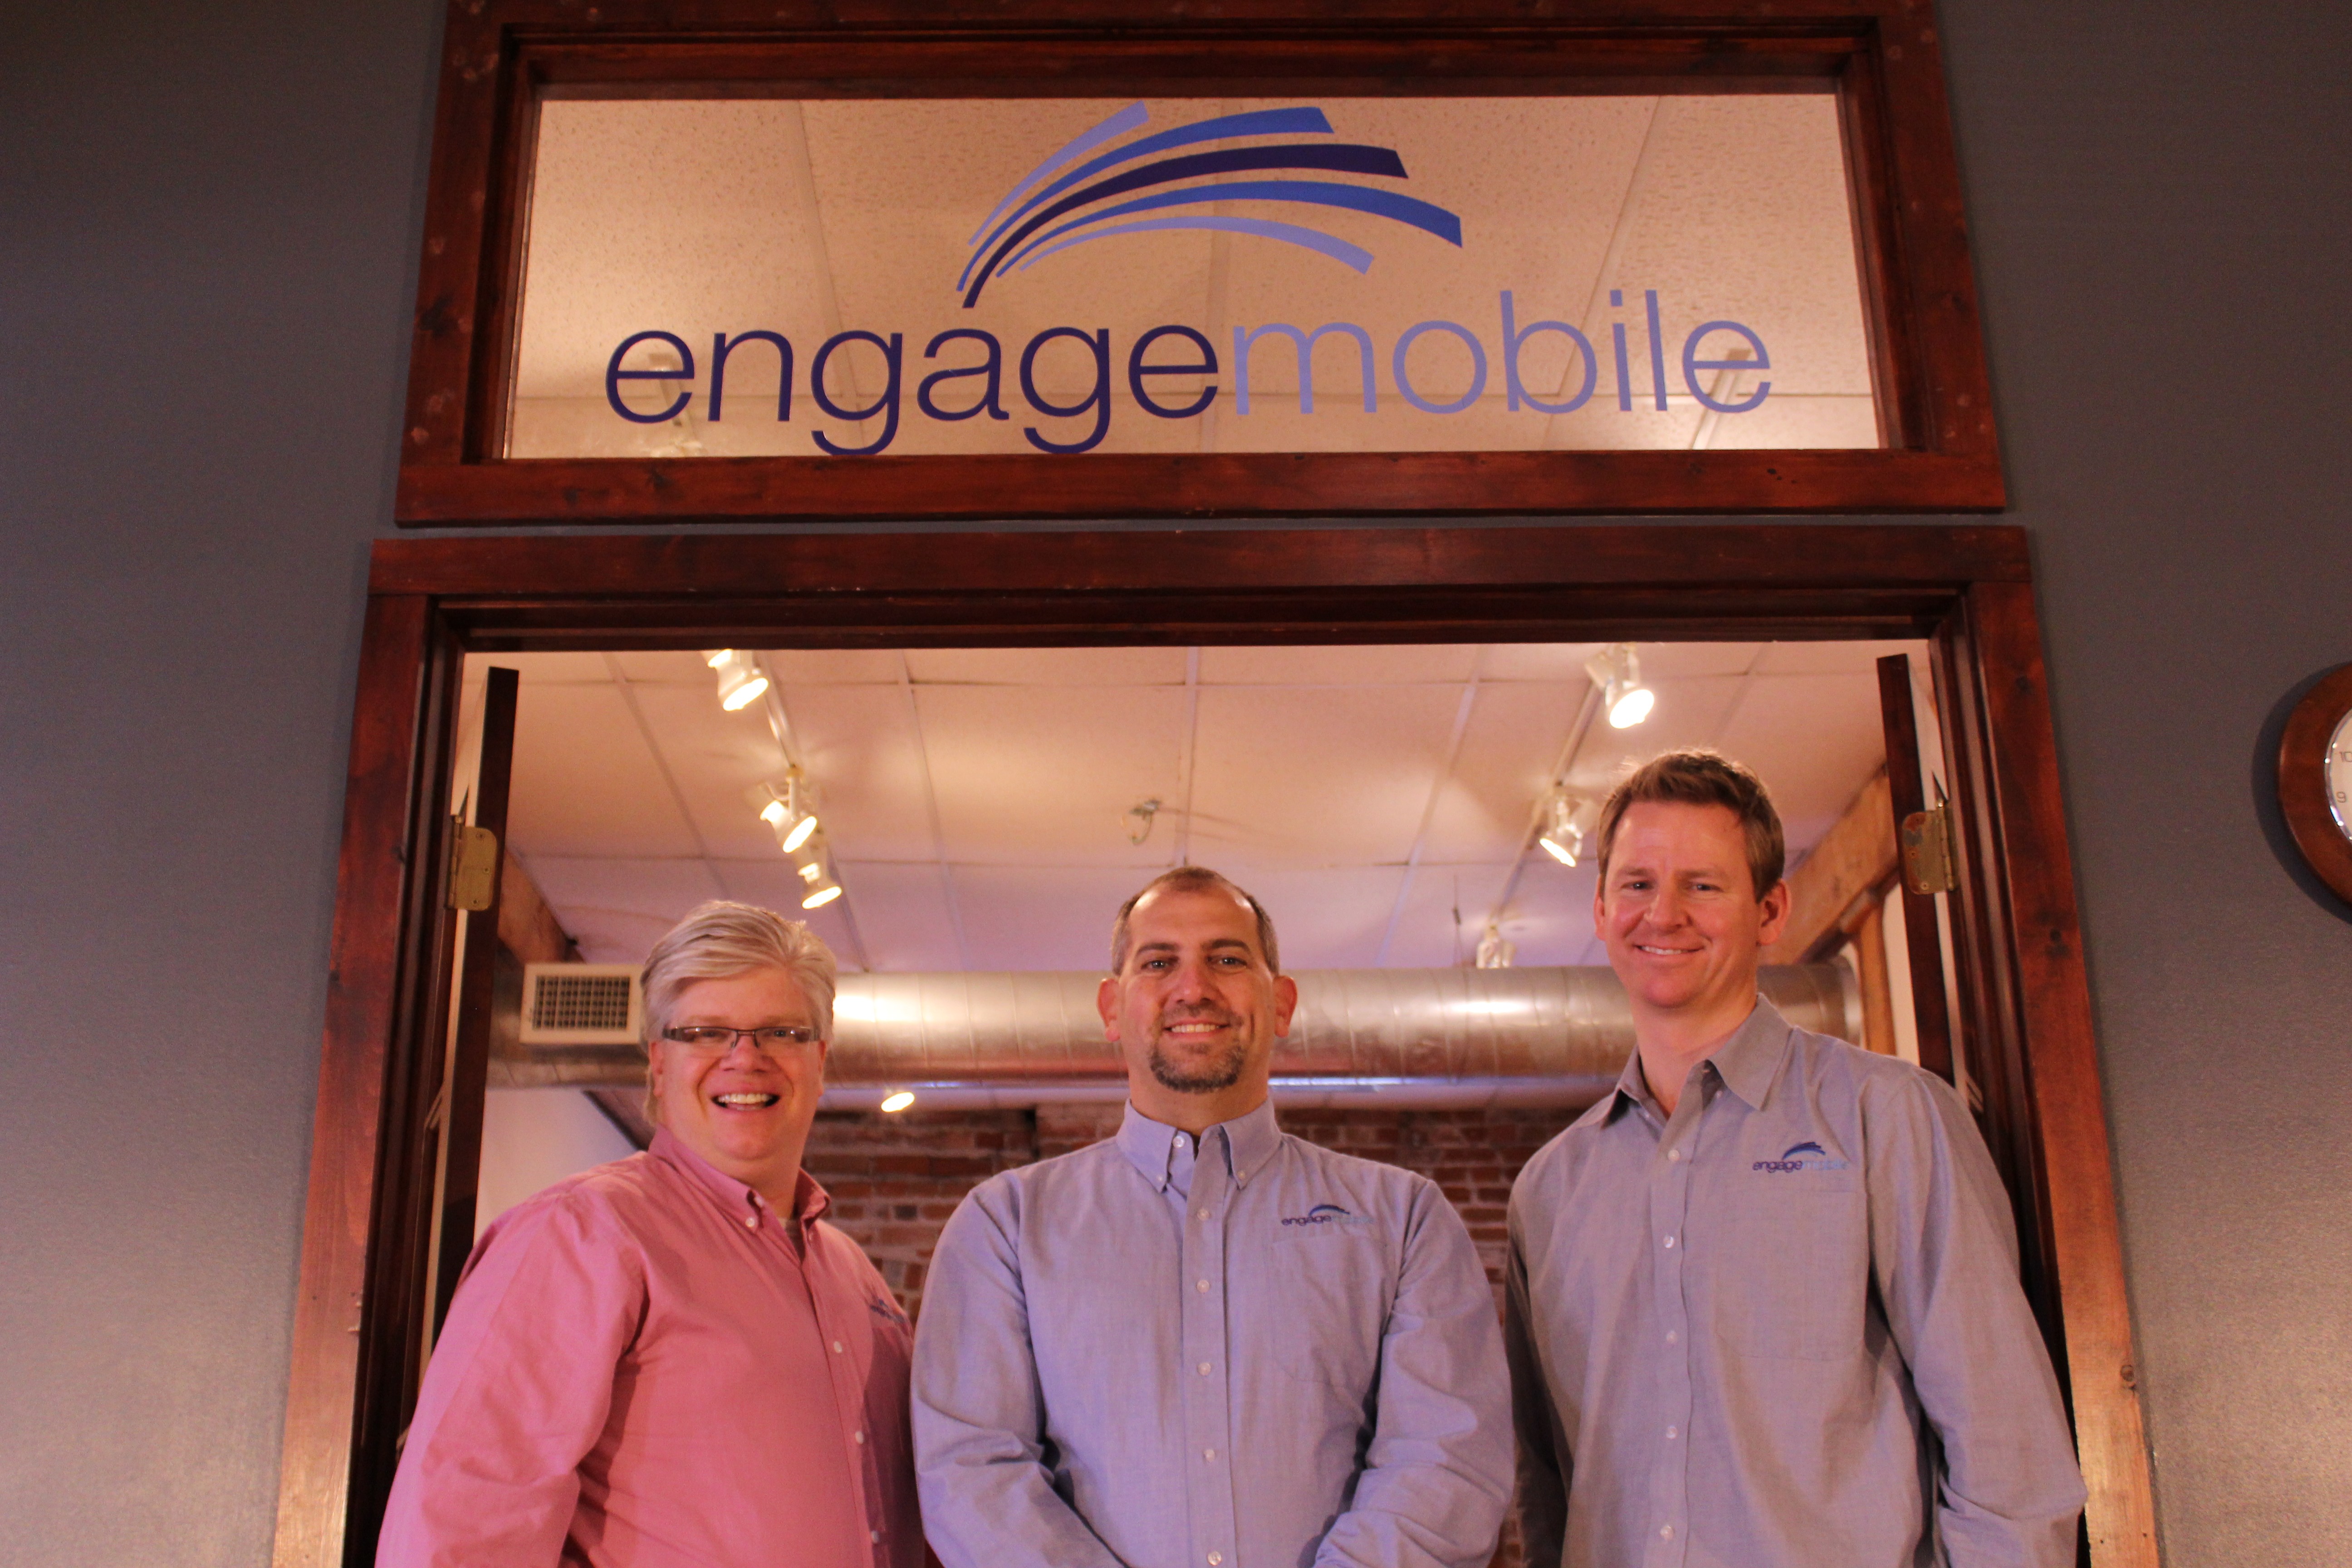 Matthew Barksdale, Darrin Clawson and Steve Timperley of Engage Mobile